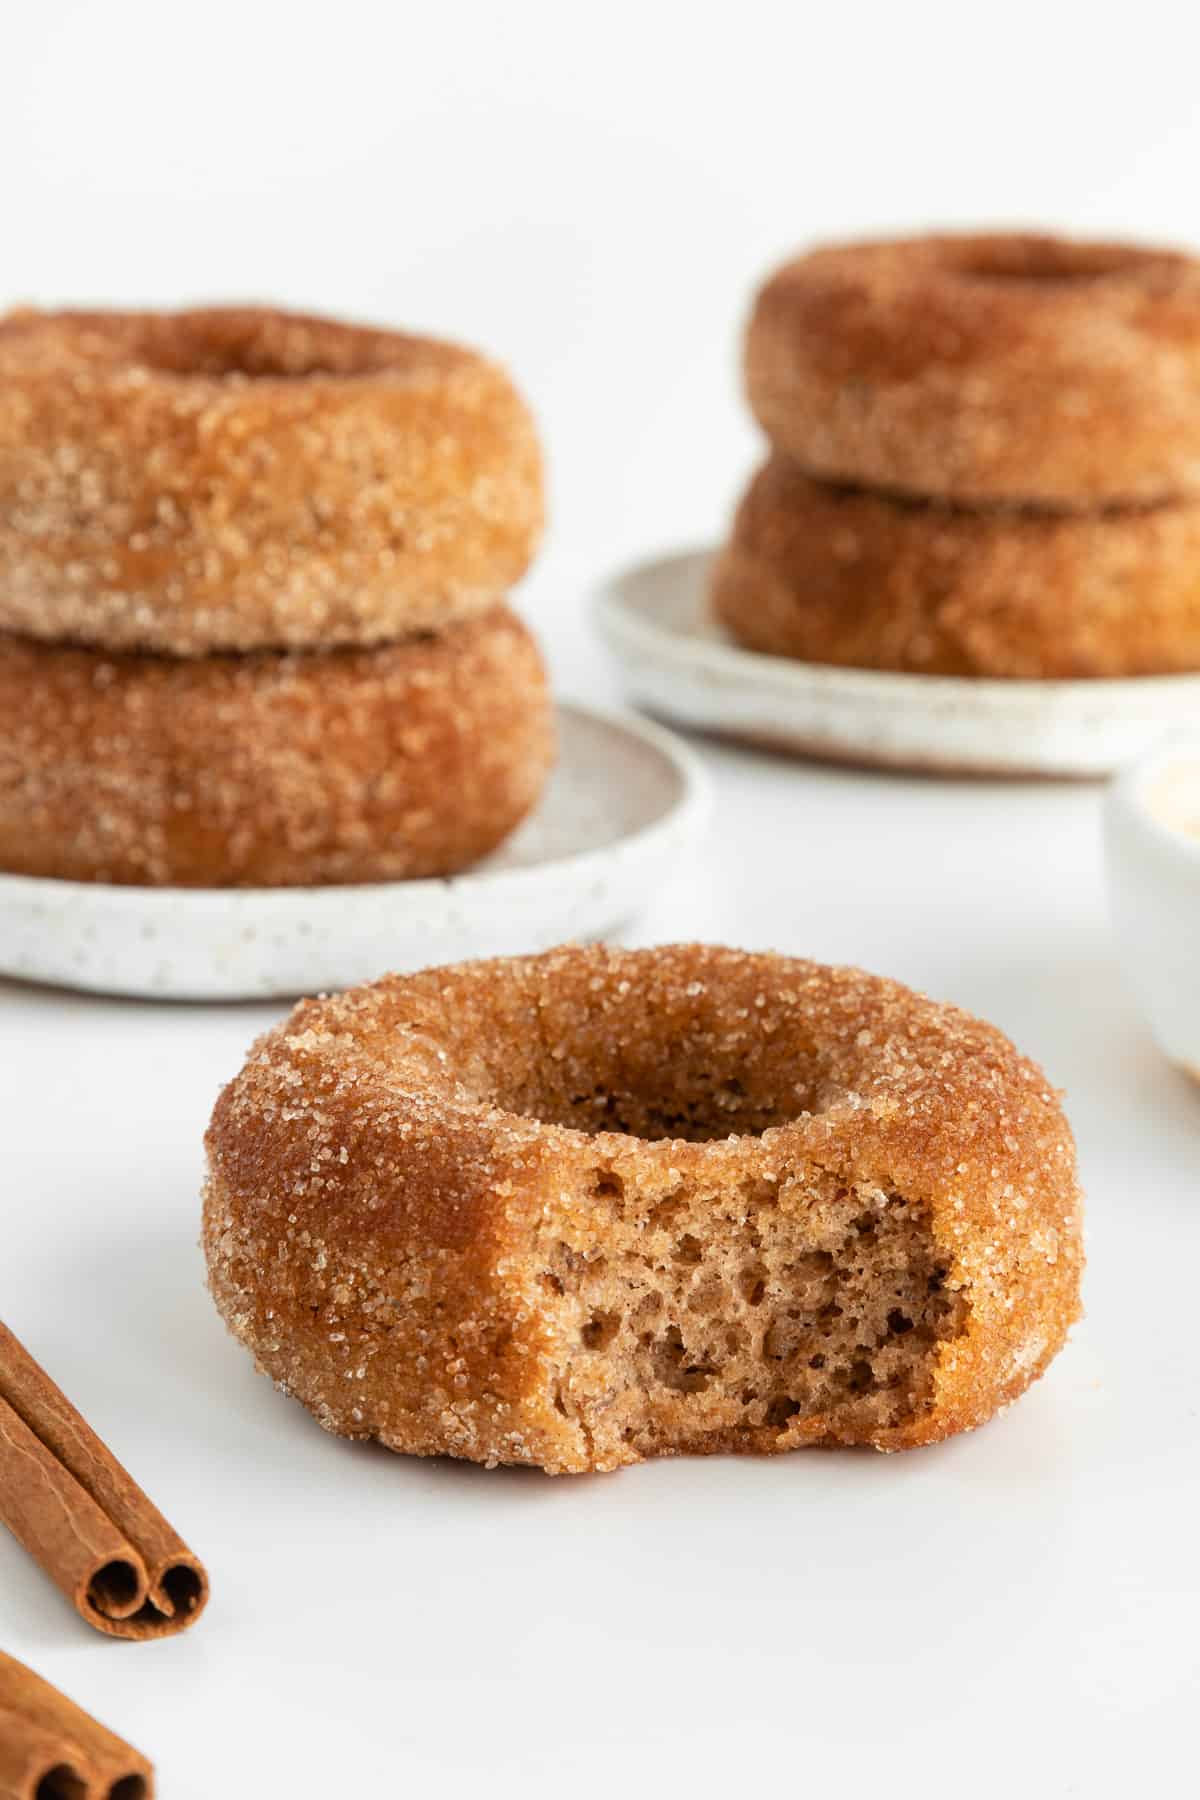 a partially bitten vegan cinnamon sugar donut with stacks of donuts behind it